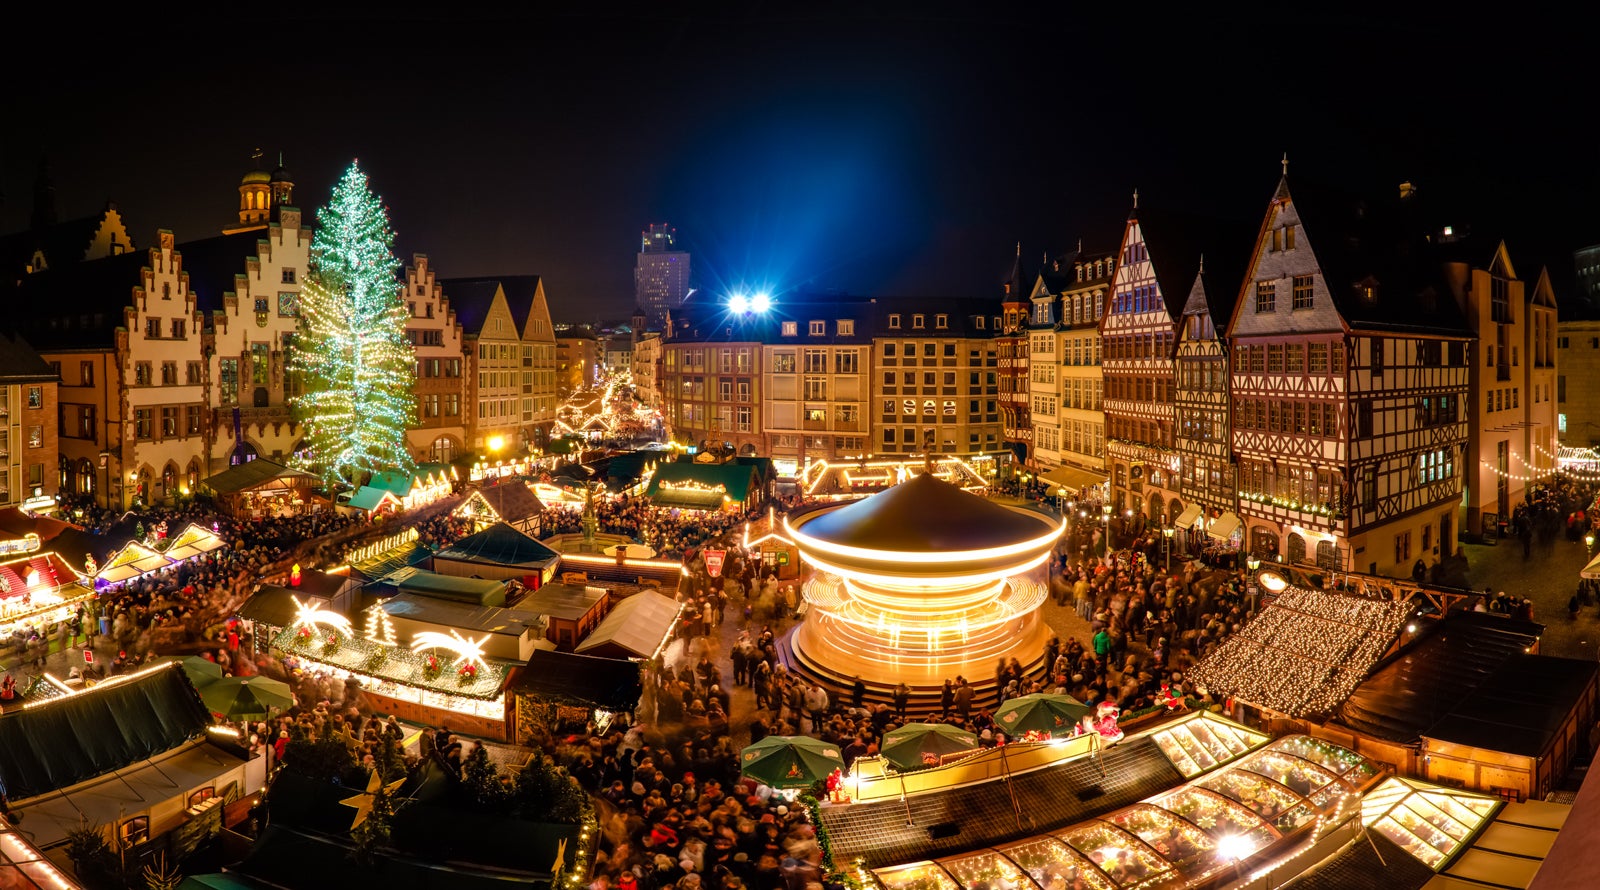 The best Christmas markets in Europe for 2022